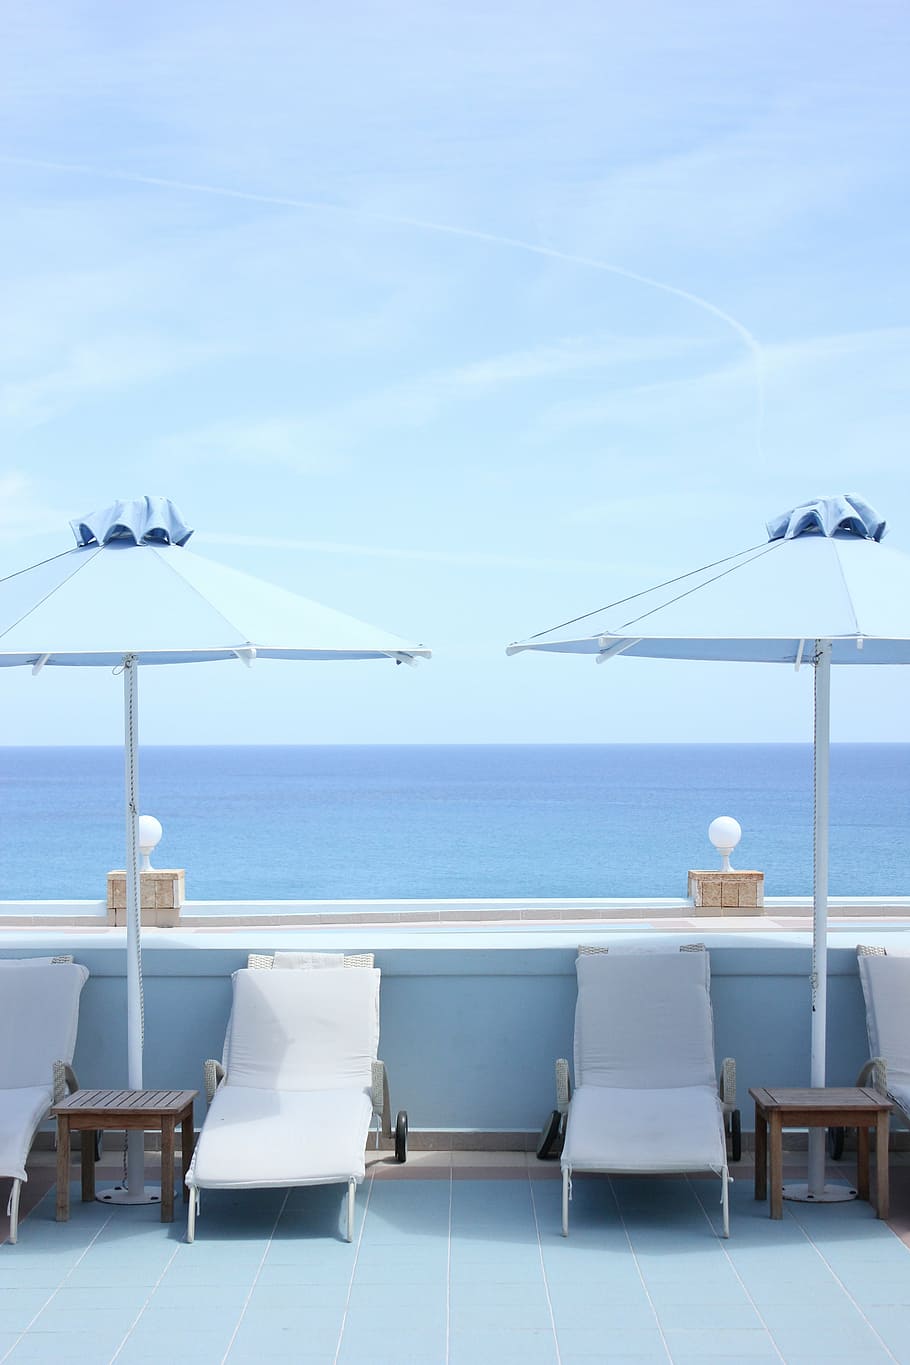 four, white, outdoor, loungers, shade, two, blue, parasols, overlooking, sea